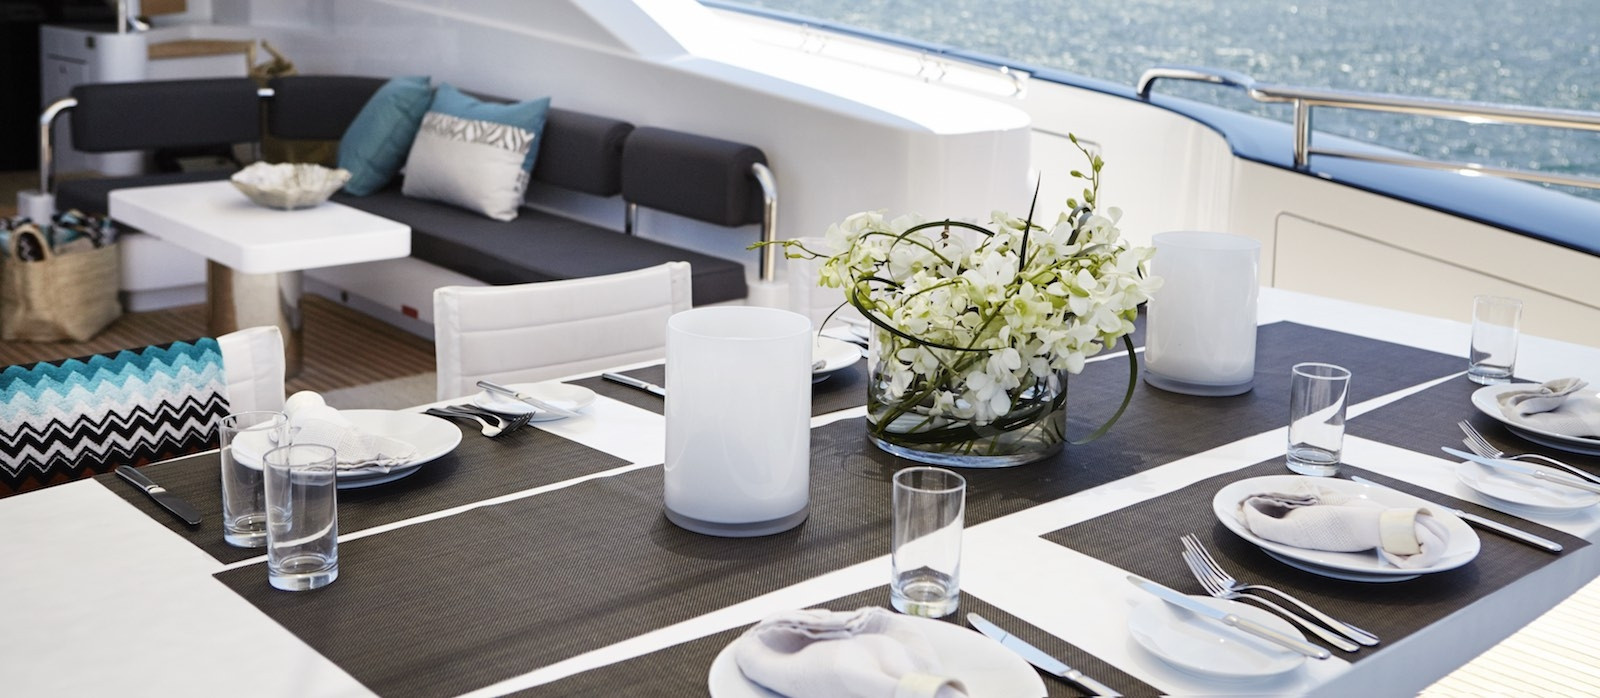 Dining and lounge on aft deck of Quantum super yacht hire